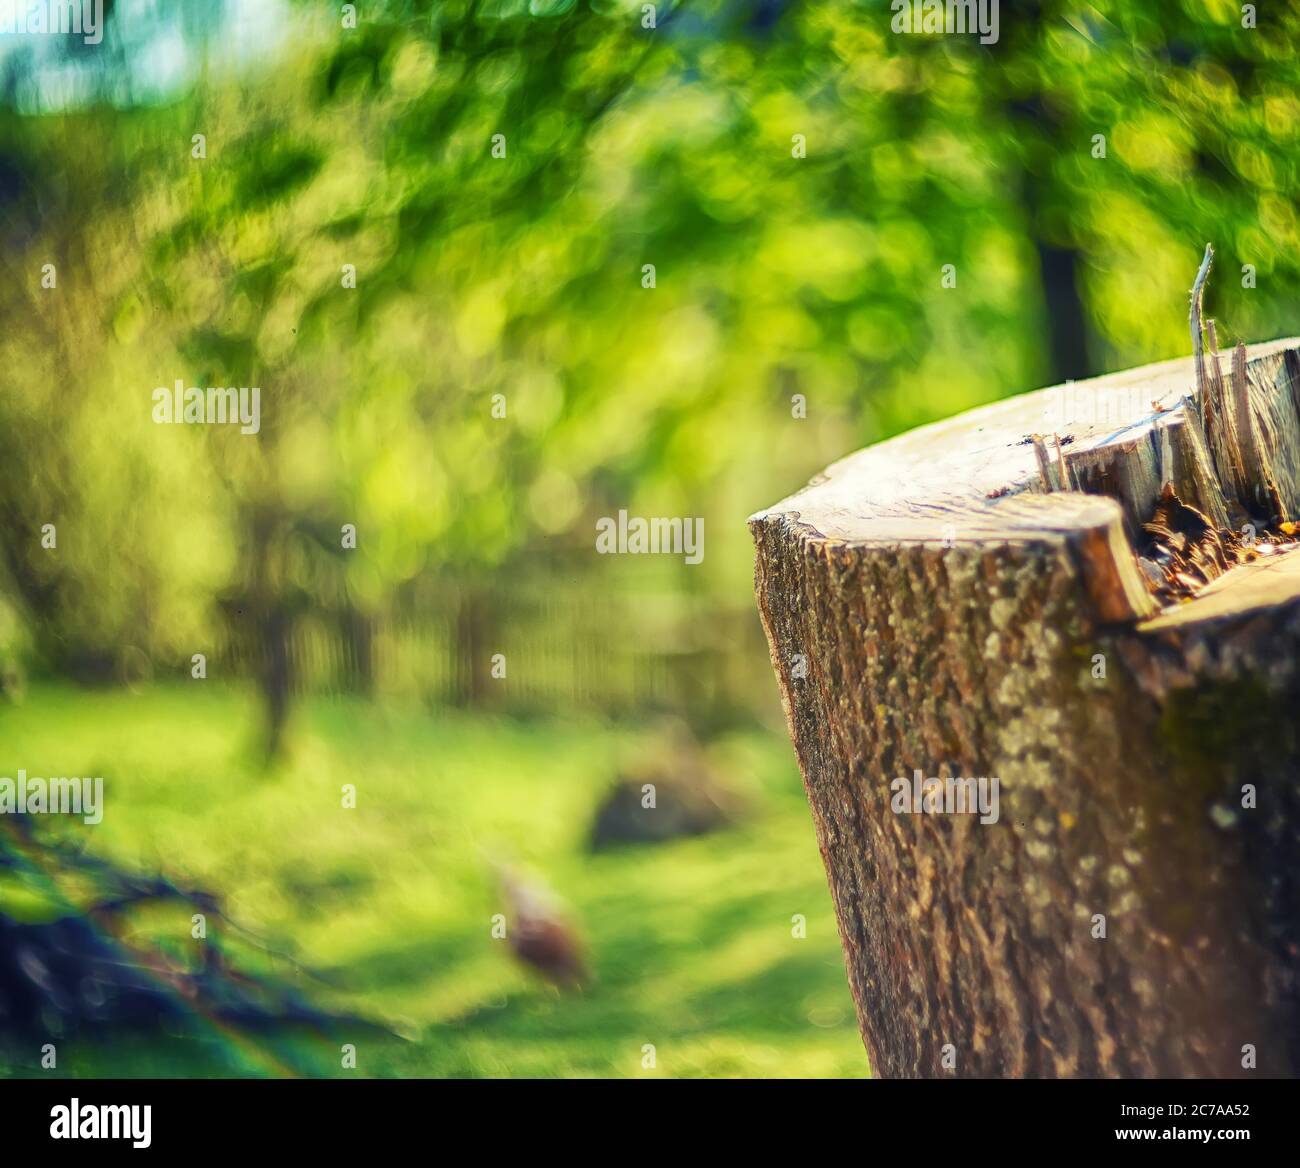 Fresh healthy green bio background with abstract blurred rural landscape and bright summer sunlight. tree stump in the foreground Stock Photo